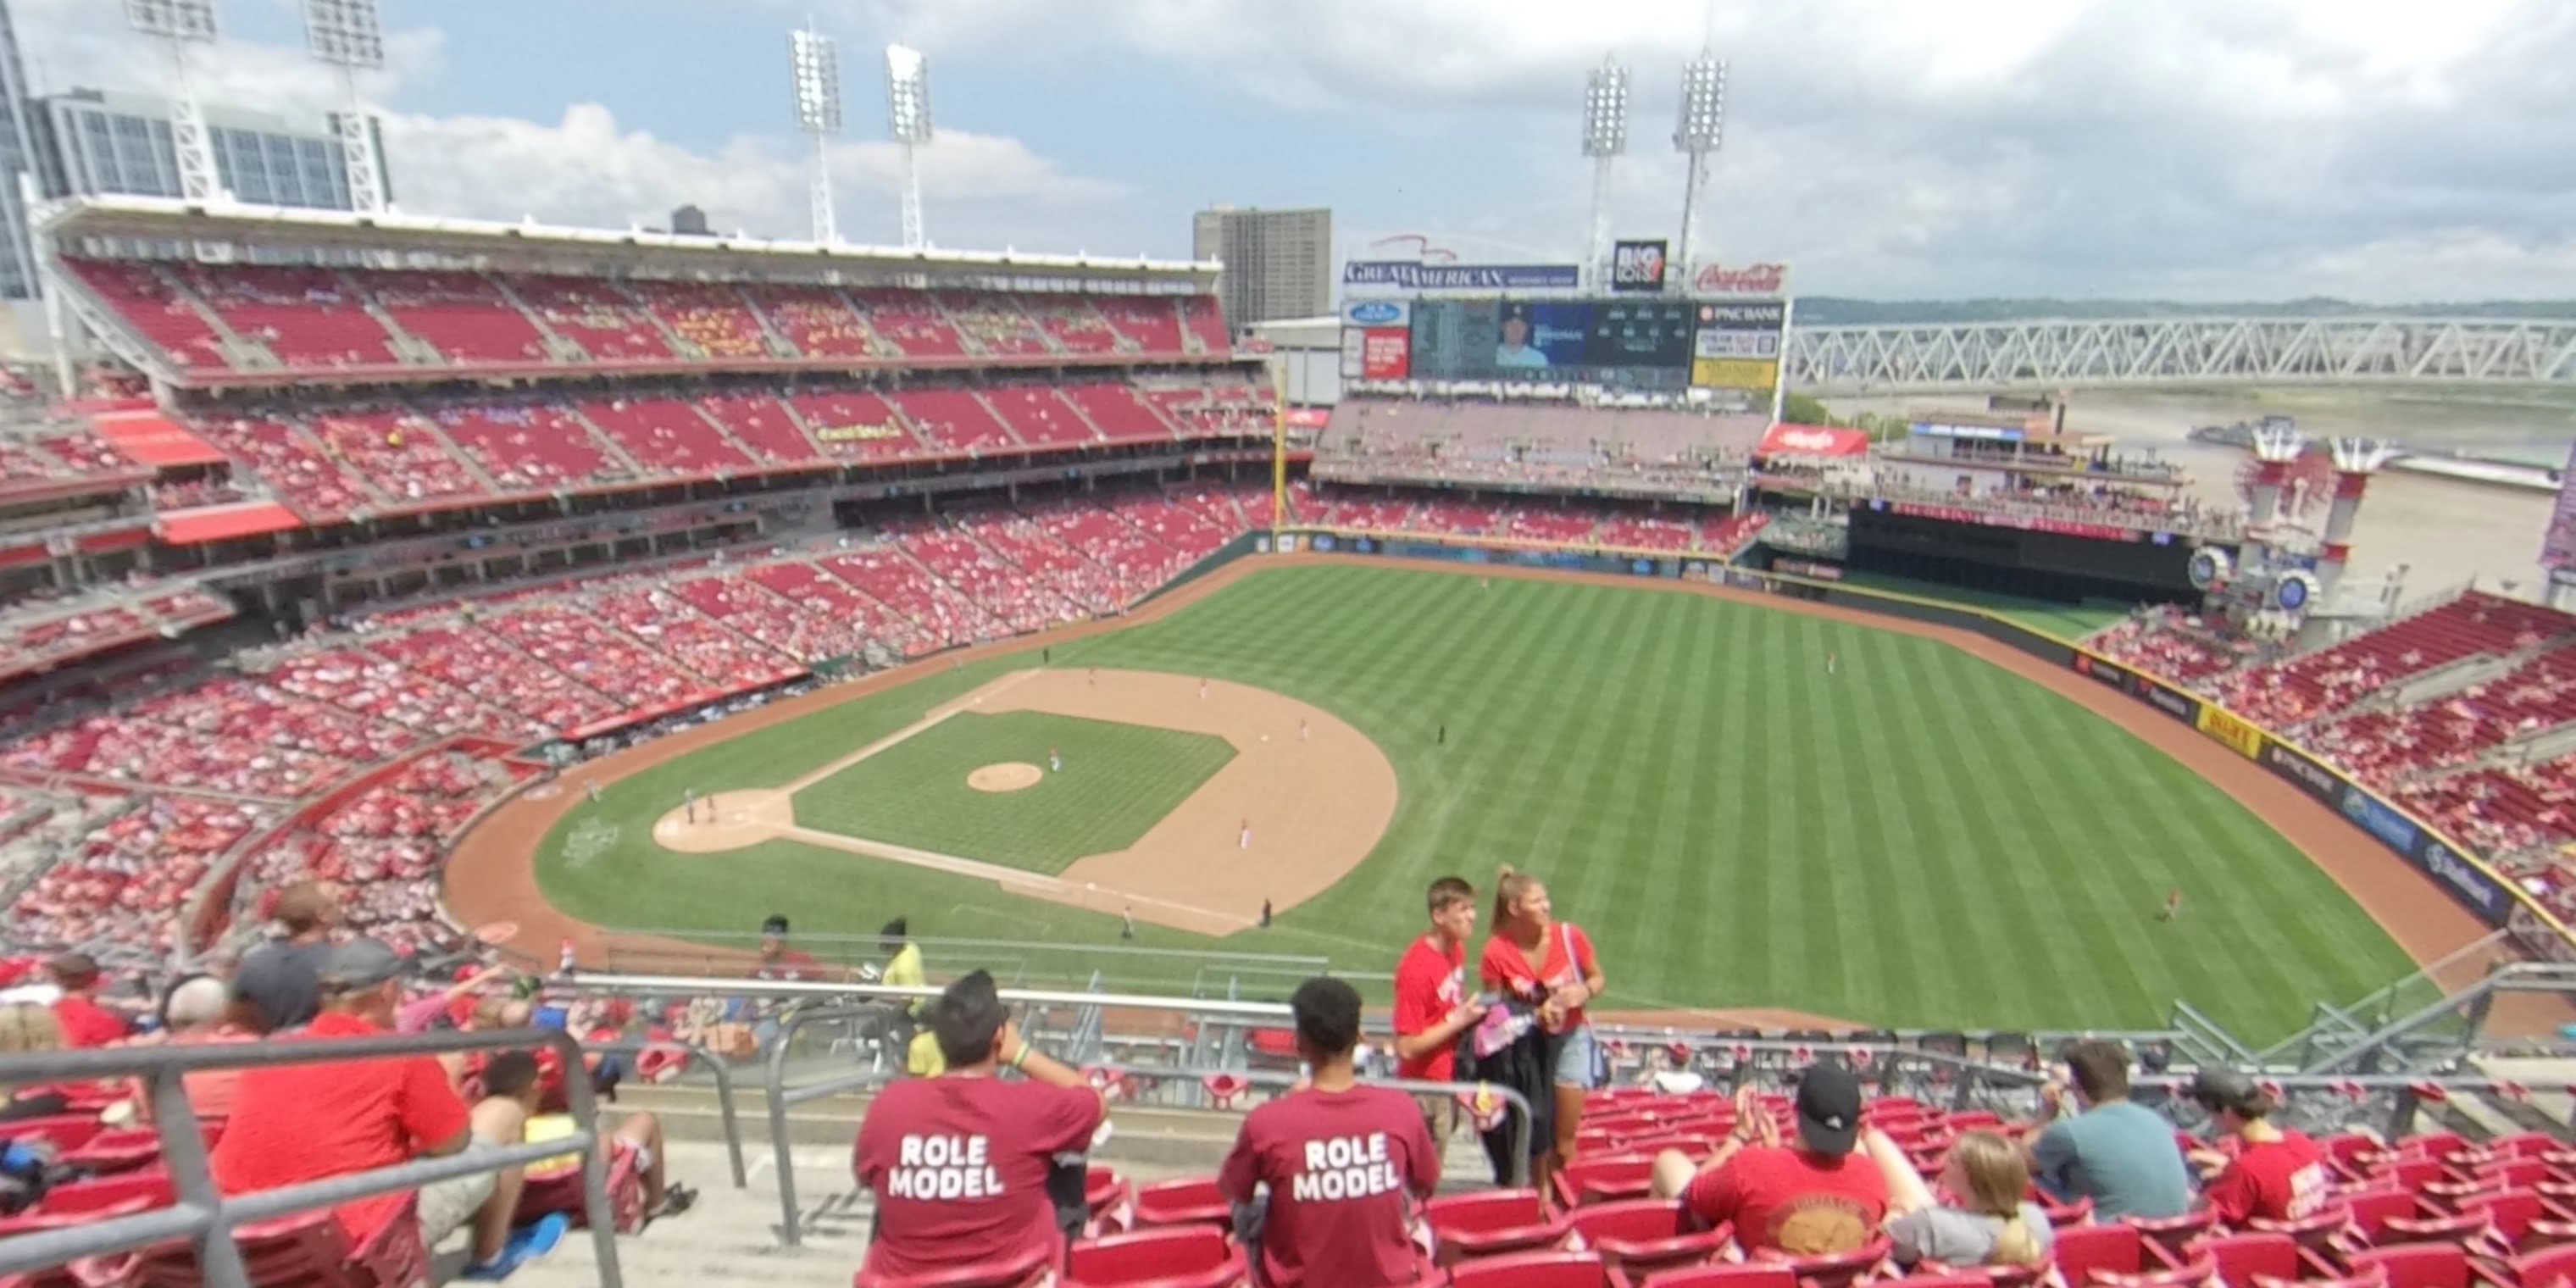 Section 533 At Great American Ball Park Rateyourseats Com